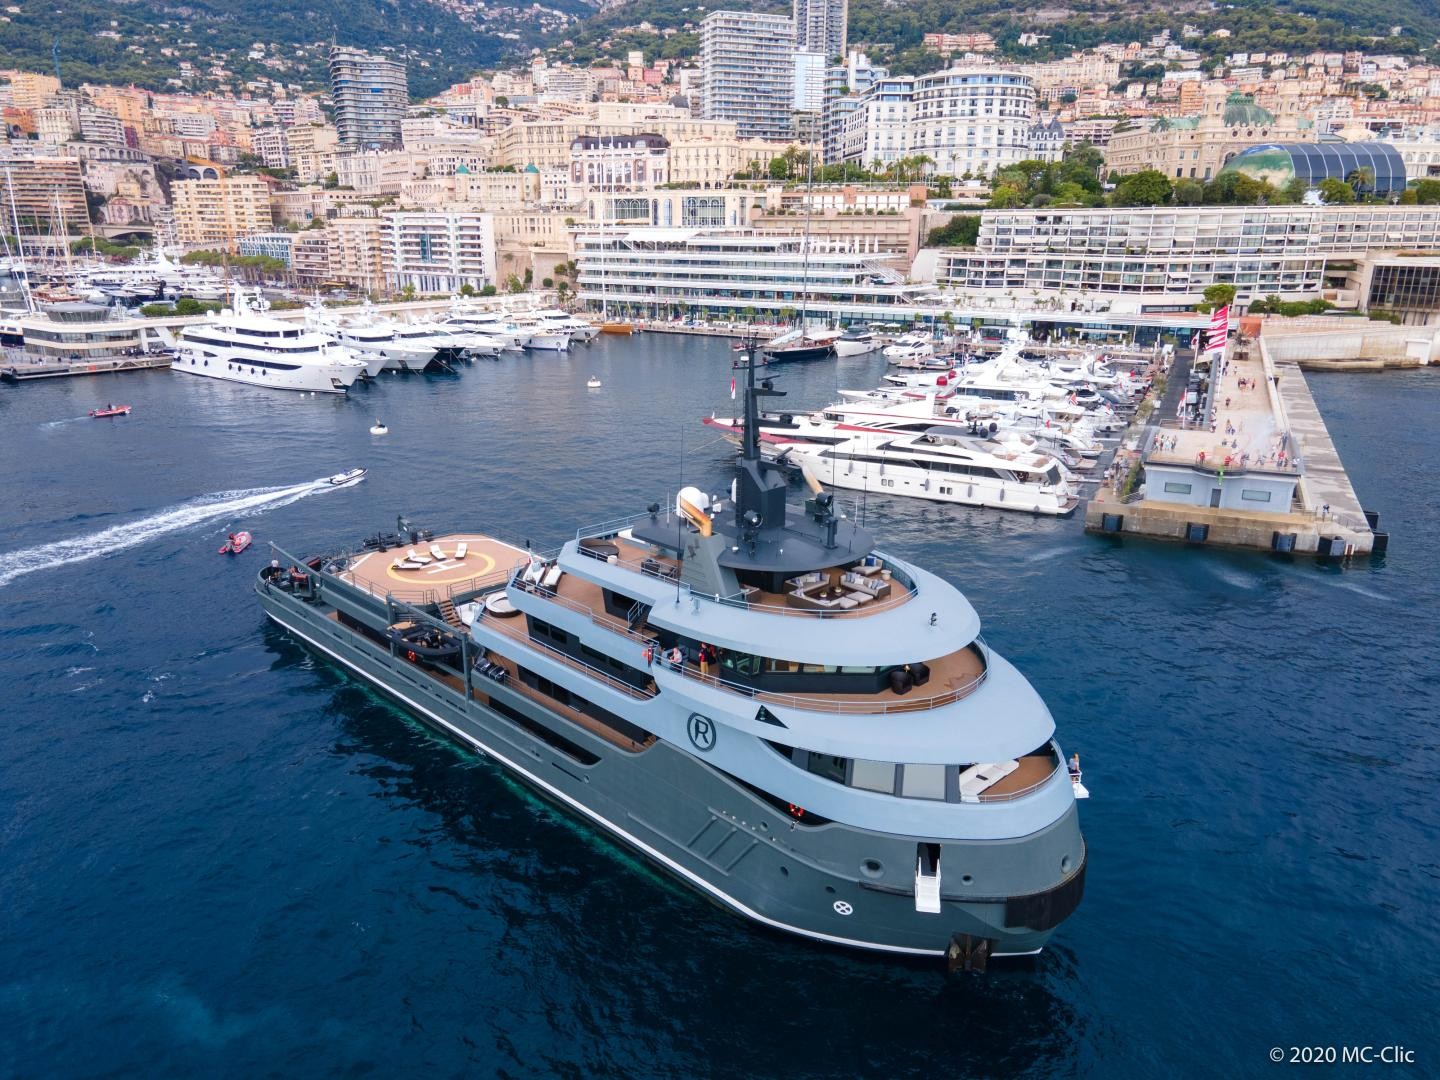 Monaco, Capitale du Yachting Experience: M/Y Ragnar (68m) arrives in style